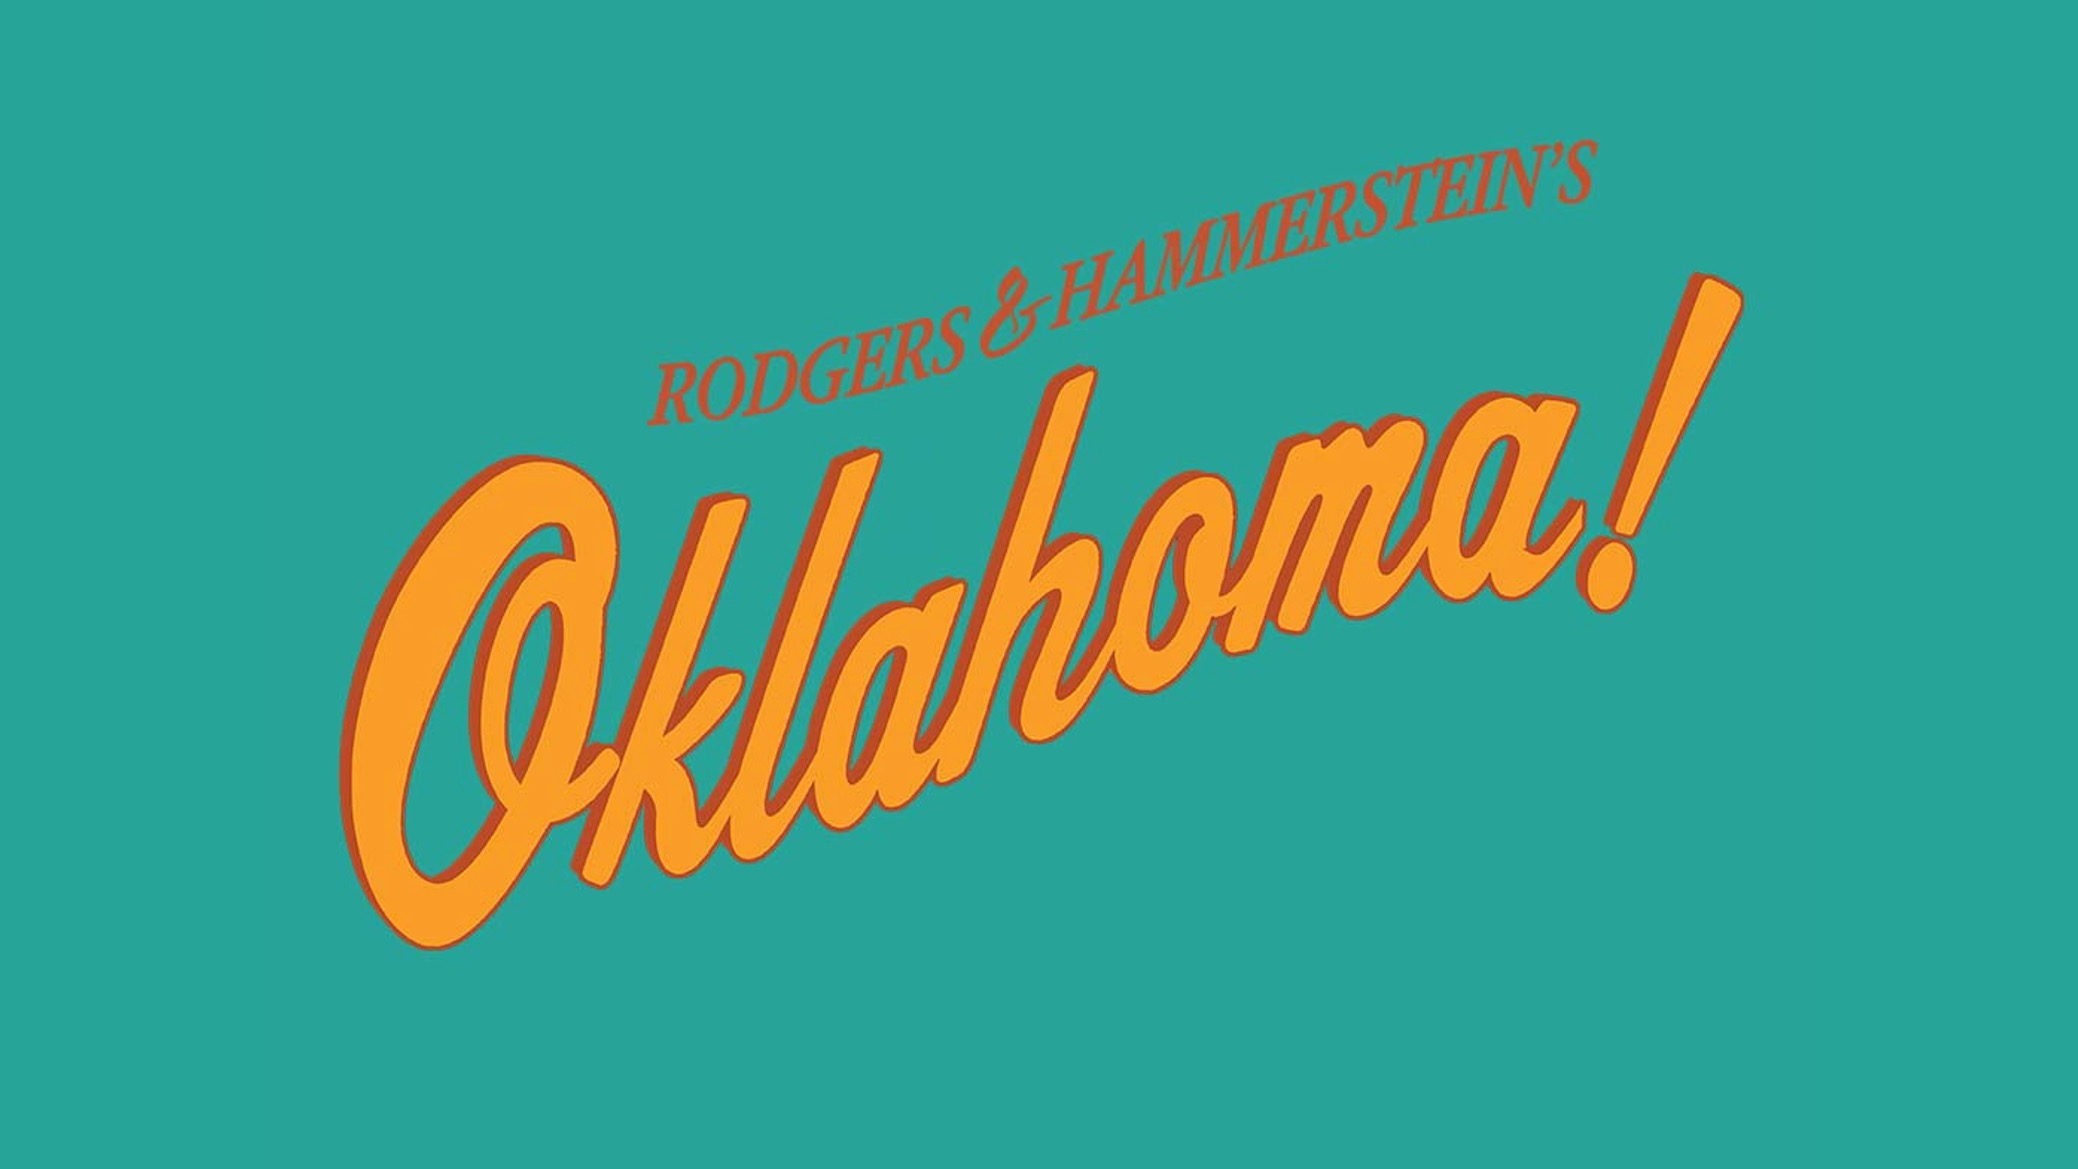 Featured image for “Five-Star Review for Rodgers & Hammerstein’s Oklahoma!”